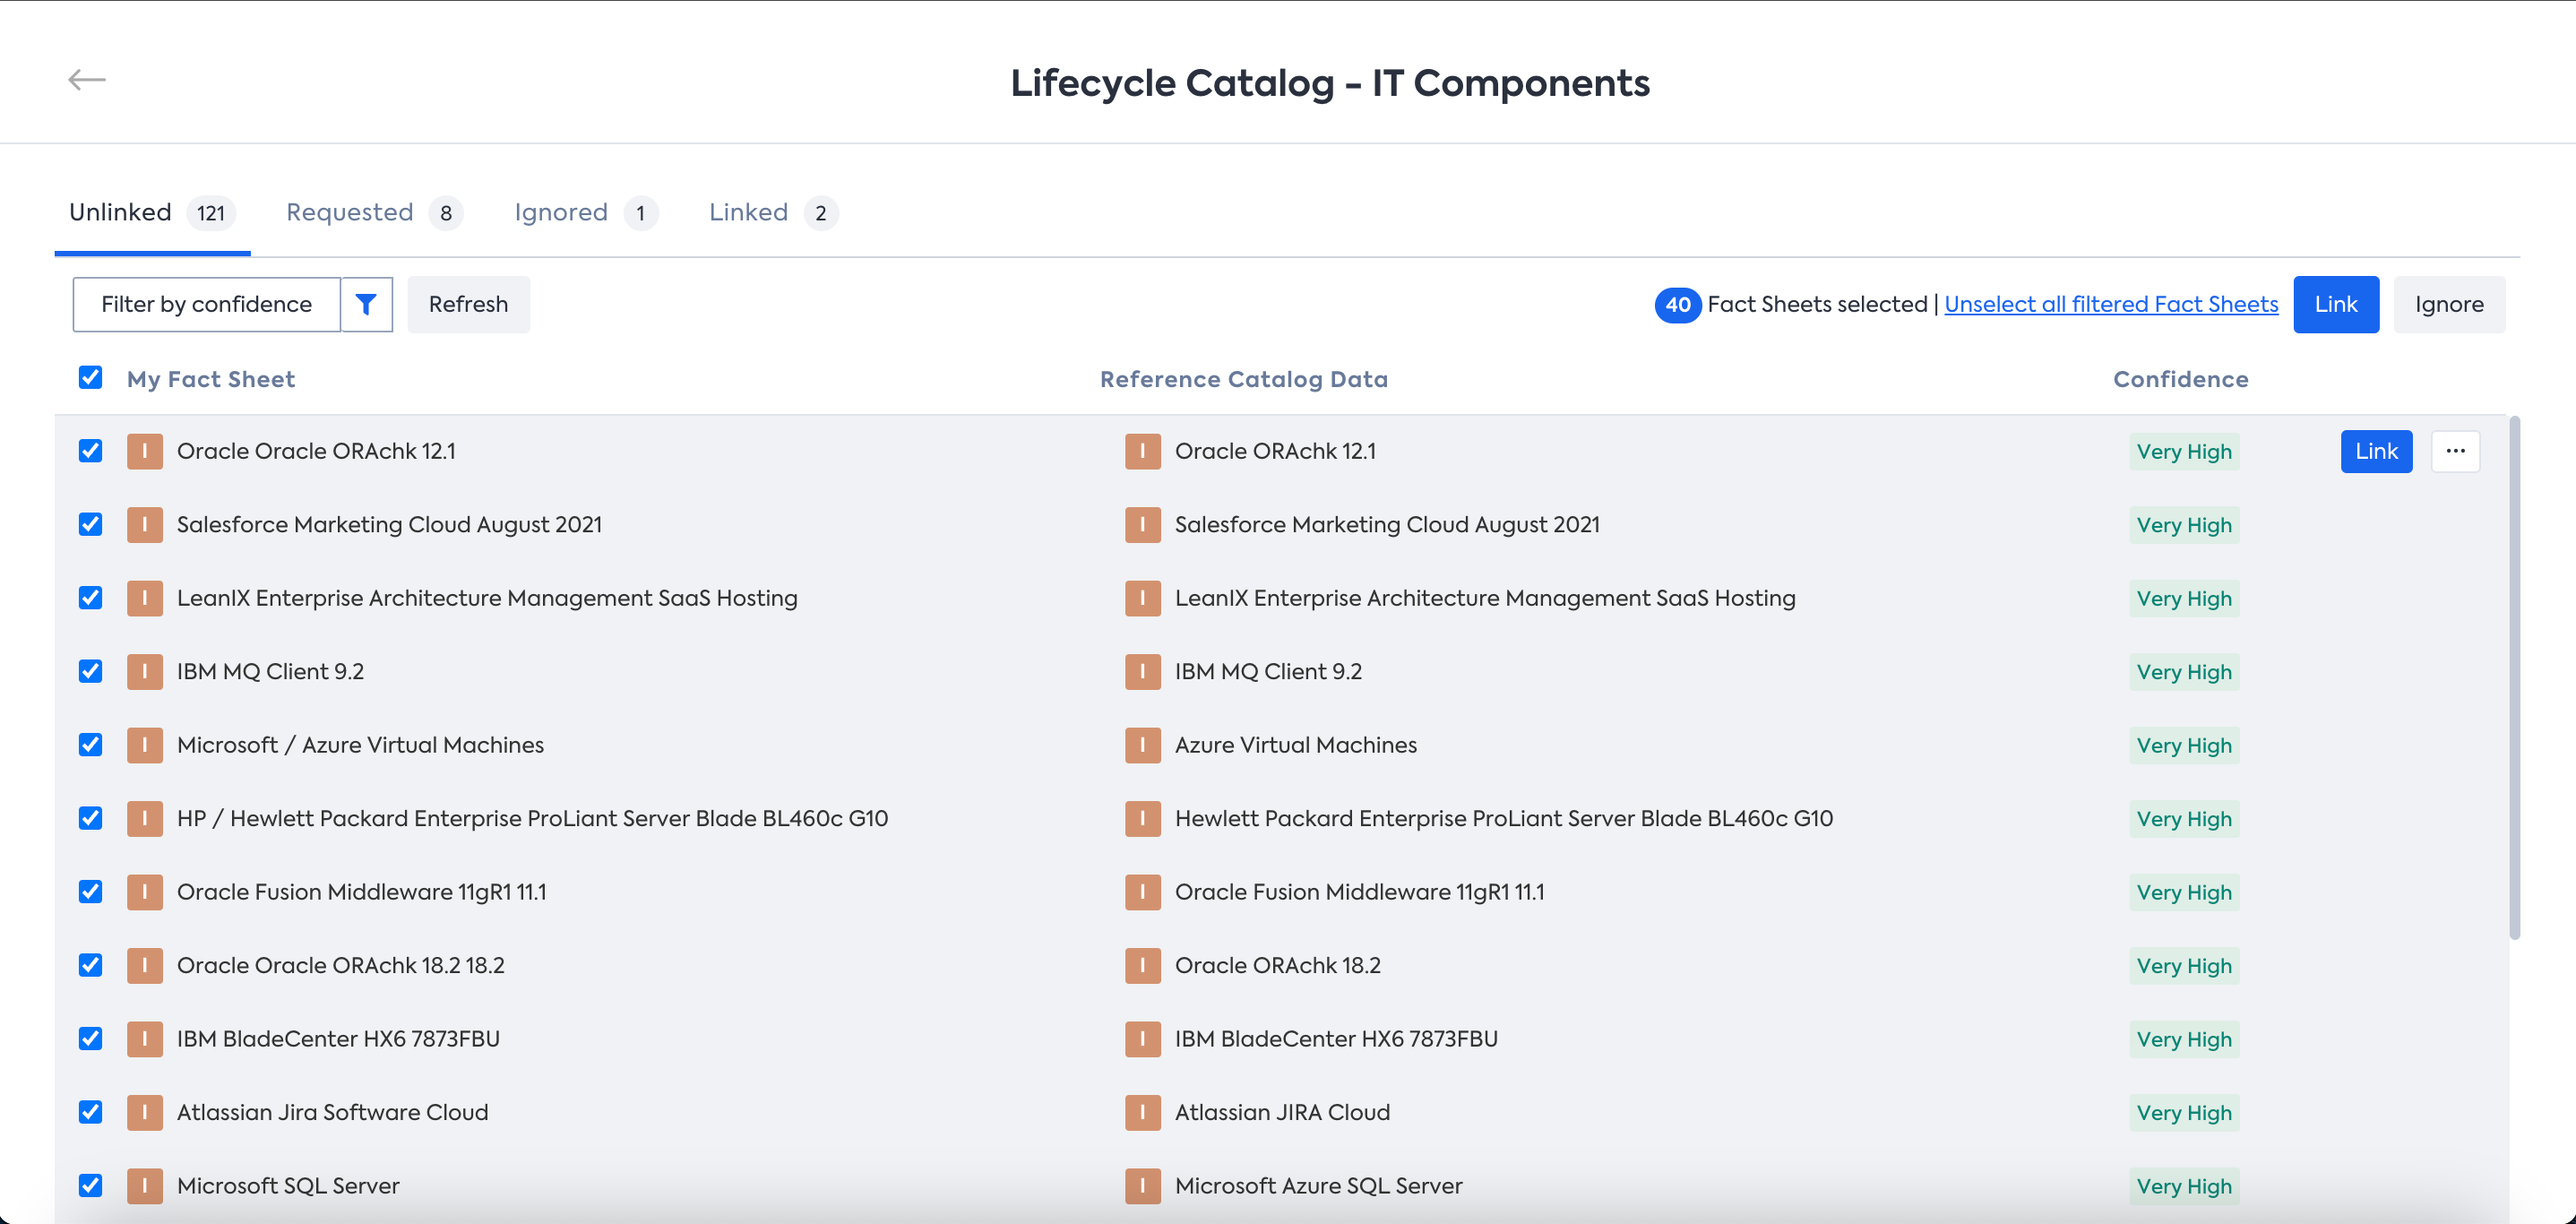 Linking IT Component Fact Sheets to Lifecycle Catalog Items